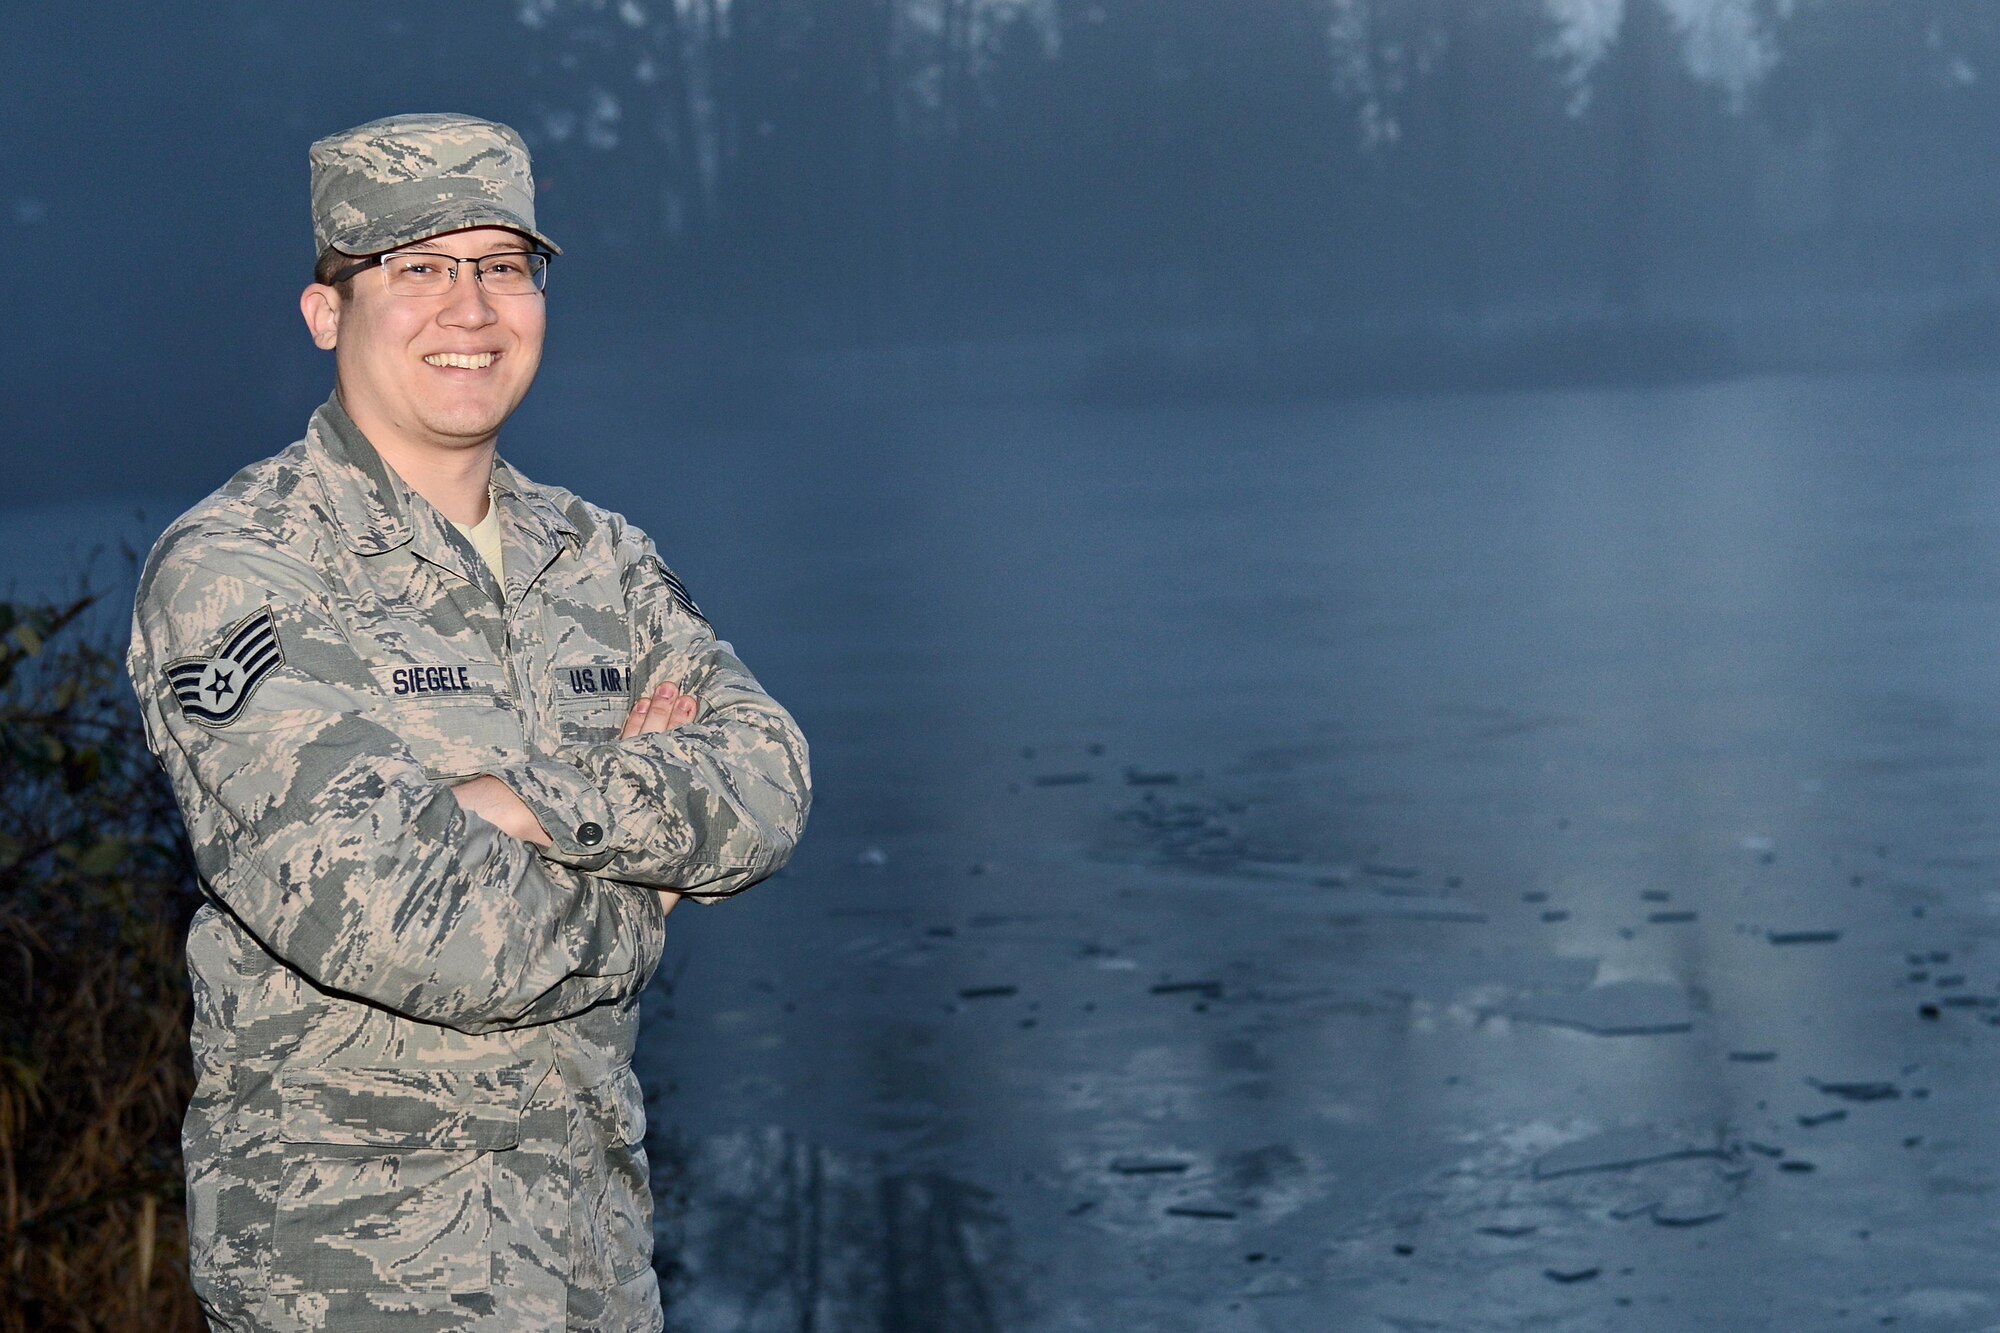 Staff Sgt. Matthew Siegele, the 627th Force Support Squadron sports and fitness NCO in charge, saved a little girl from drowning on the afternoon of Jan. 1, 2016, when she was walking on a frozen Carter Lake at Joint Base Lewis-McChord, Wash., and fell through the ice. (U.S. Air Force photo/Senior Airman Divine Cox)